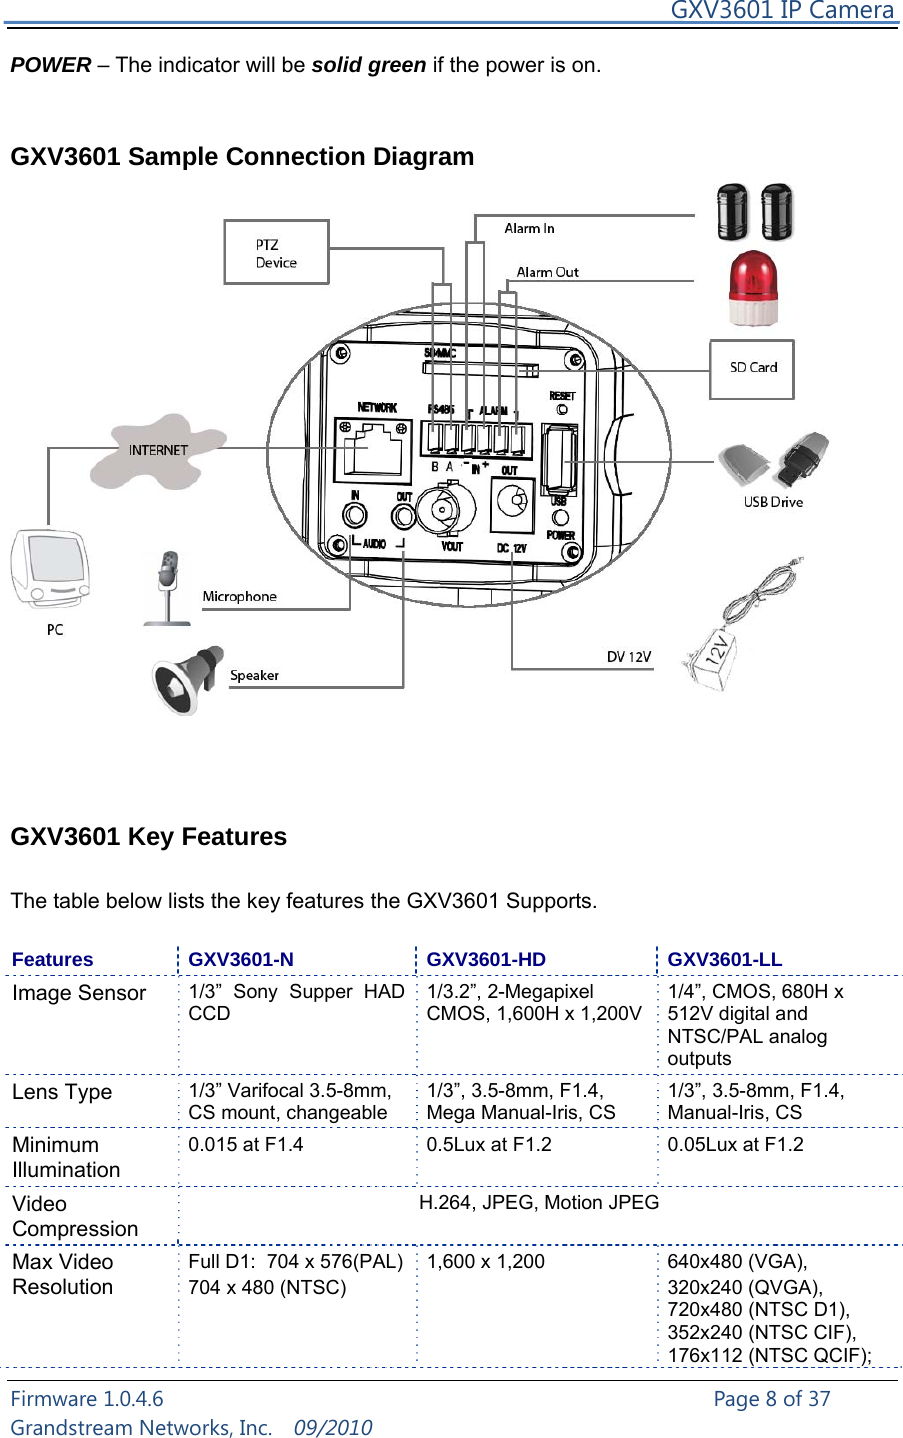     GXV3601 IP Camera Firmware 1.0.4.6                                                   Page 8 of 37     Grandstream Networks, Inc.  09/2010  POWER – The indicator will be solid green if the power is on.   GXV3601 Sample Connection Diagram     GXV3601 Key Features    The table below lists the key features the GXV3601 Supports.  Features GXV3601-N  GXV3601-HD  GXV3601-LL Image Sensor 1/3” Sony Supper HAD CCD 1/3.2”, 2-Megapixel CMOS, 1,600H x 1,200V 1/4”, CMOS, 680H x 512V digital and NTSC/PAL analog outputs Lens Type 1/3” Varifocal 3.5-8mm, CS mount, changeable 1/3”, 3.5-8mm, F1.4, Mega Manual-Iris, CS 1/3”, 3.5-8mm, F1.4, Manual-Iris, CS Minimum Illumination 0.015 at F1.4 0.5Lux at F1.2 0.05Lux at F1.2 Video Compression H.264, JPEG, Motion JPEG Max Video Resolution Full D1:  704 x 576(PAL)   704 x 480 (NTSC)     1,600 x 1,200  640x480 (VGA),   320x240 (QVGA), 720x480 (NTSC D1), 352x240 (NTSC CIF), 176x112 (NTSC QCIF); 